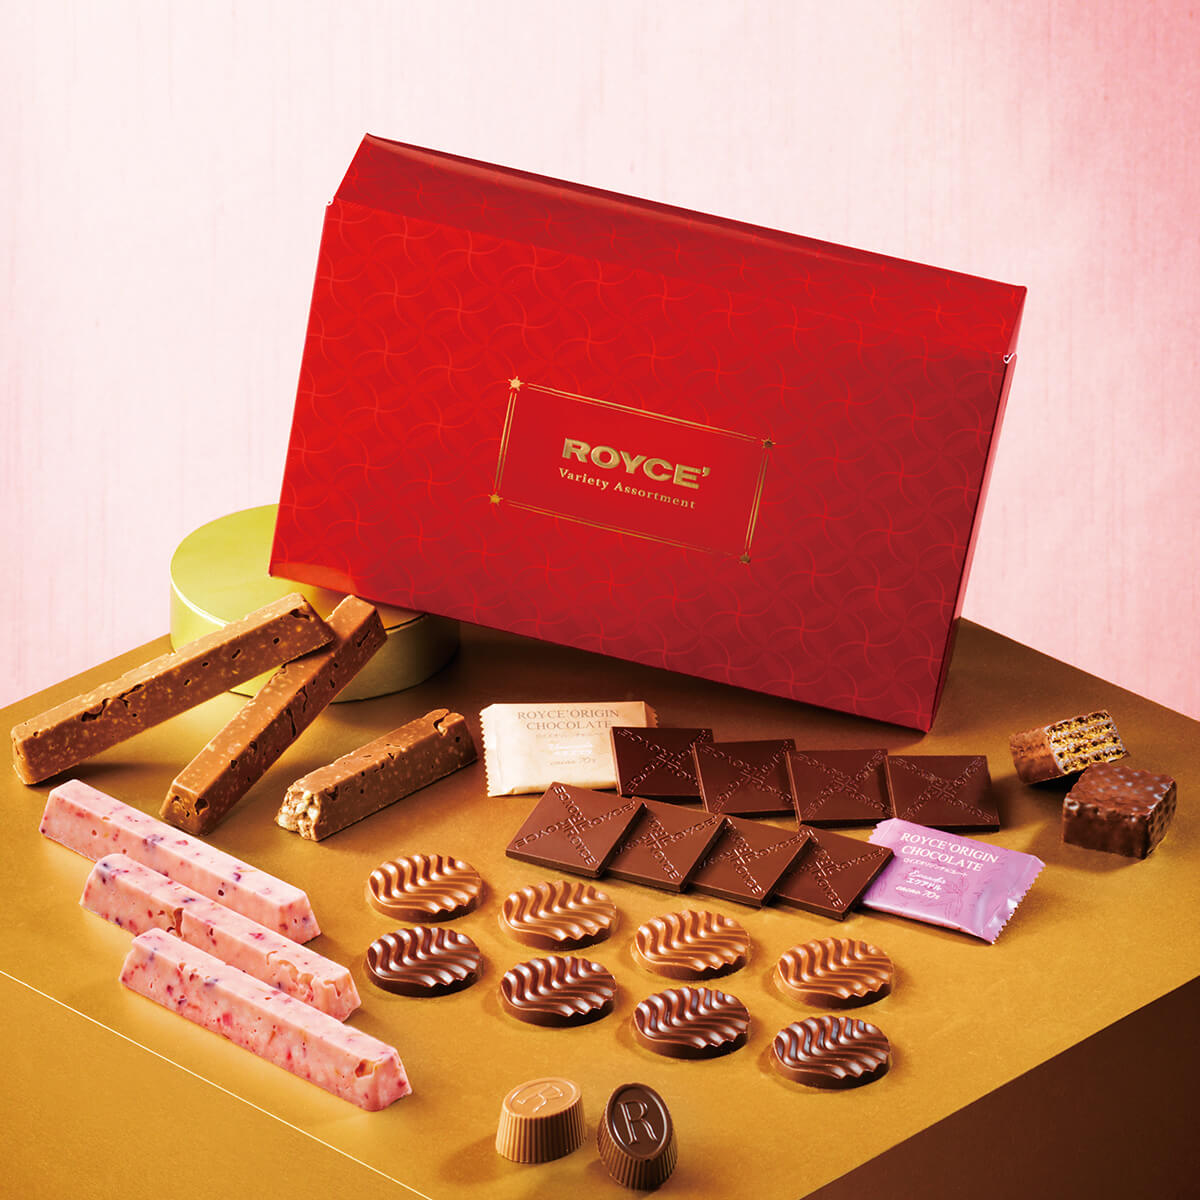 ROYCE' Chocolate - ROYCE’ Variety Assortment - Image shows a red box on top of a golden platform with different kinds of chocolates. Background is in pink. Gold text says ROYCE' Variety Assortment.